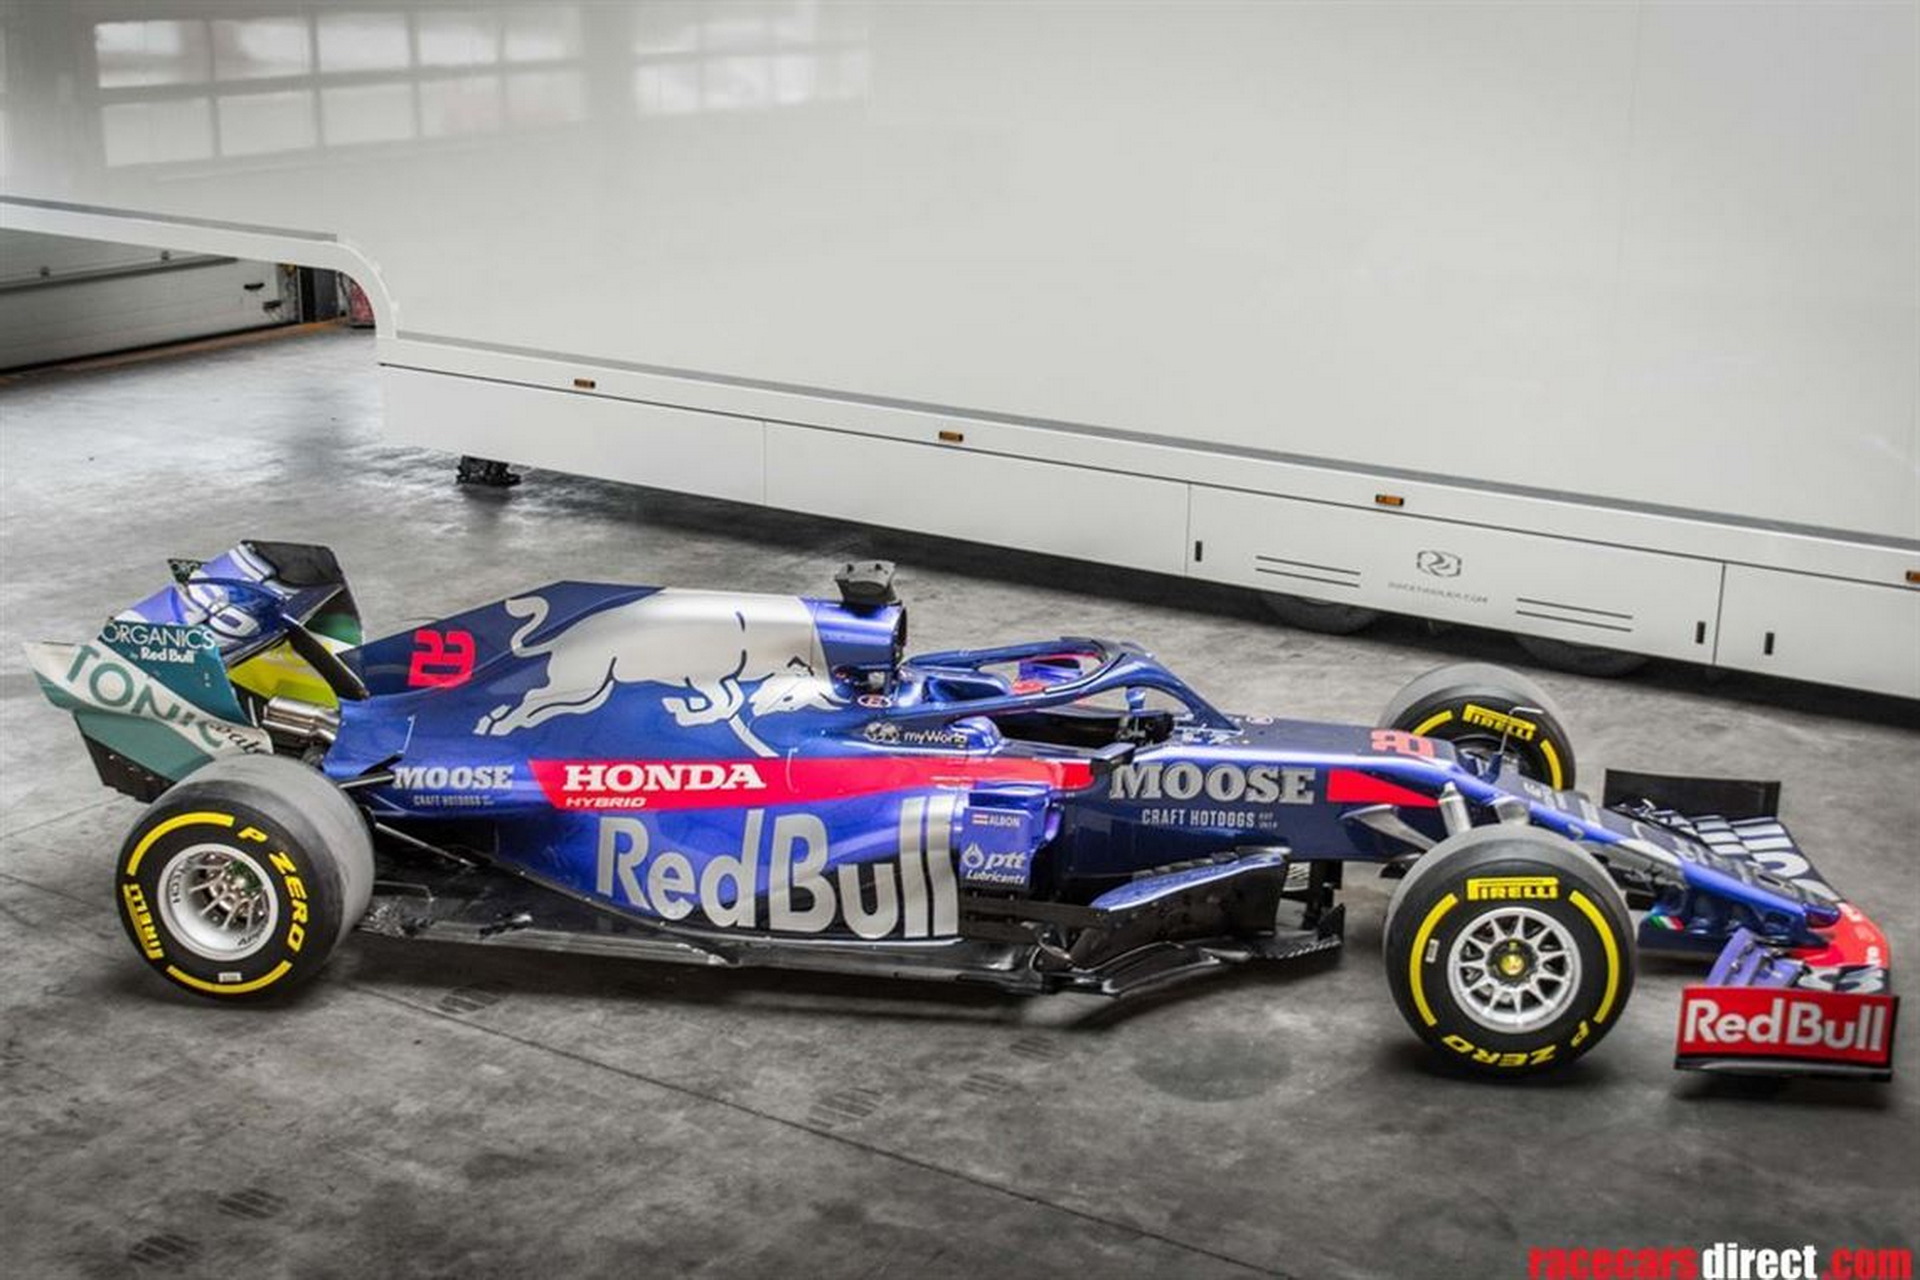 Garderobe Verknald Verlichten Ever Wanted To Own An F1 Car? Now's Your Chance With This 2019 Toro Rosso  STR14 | Carscoops